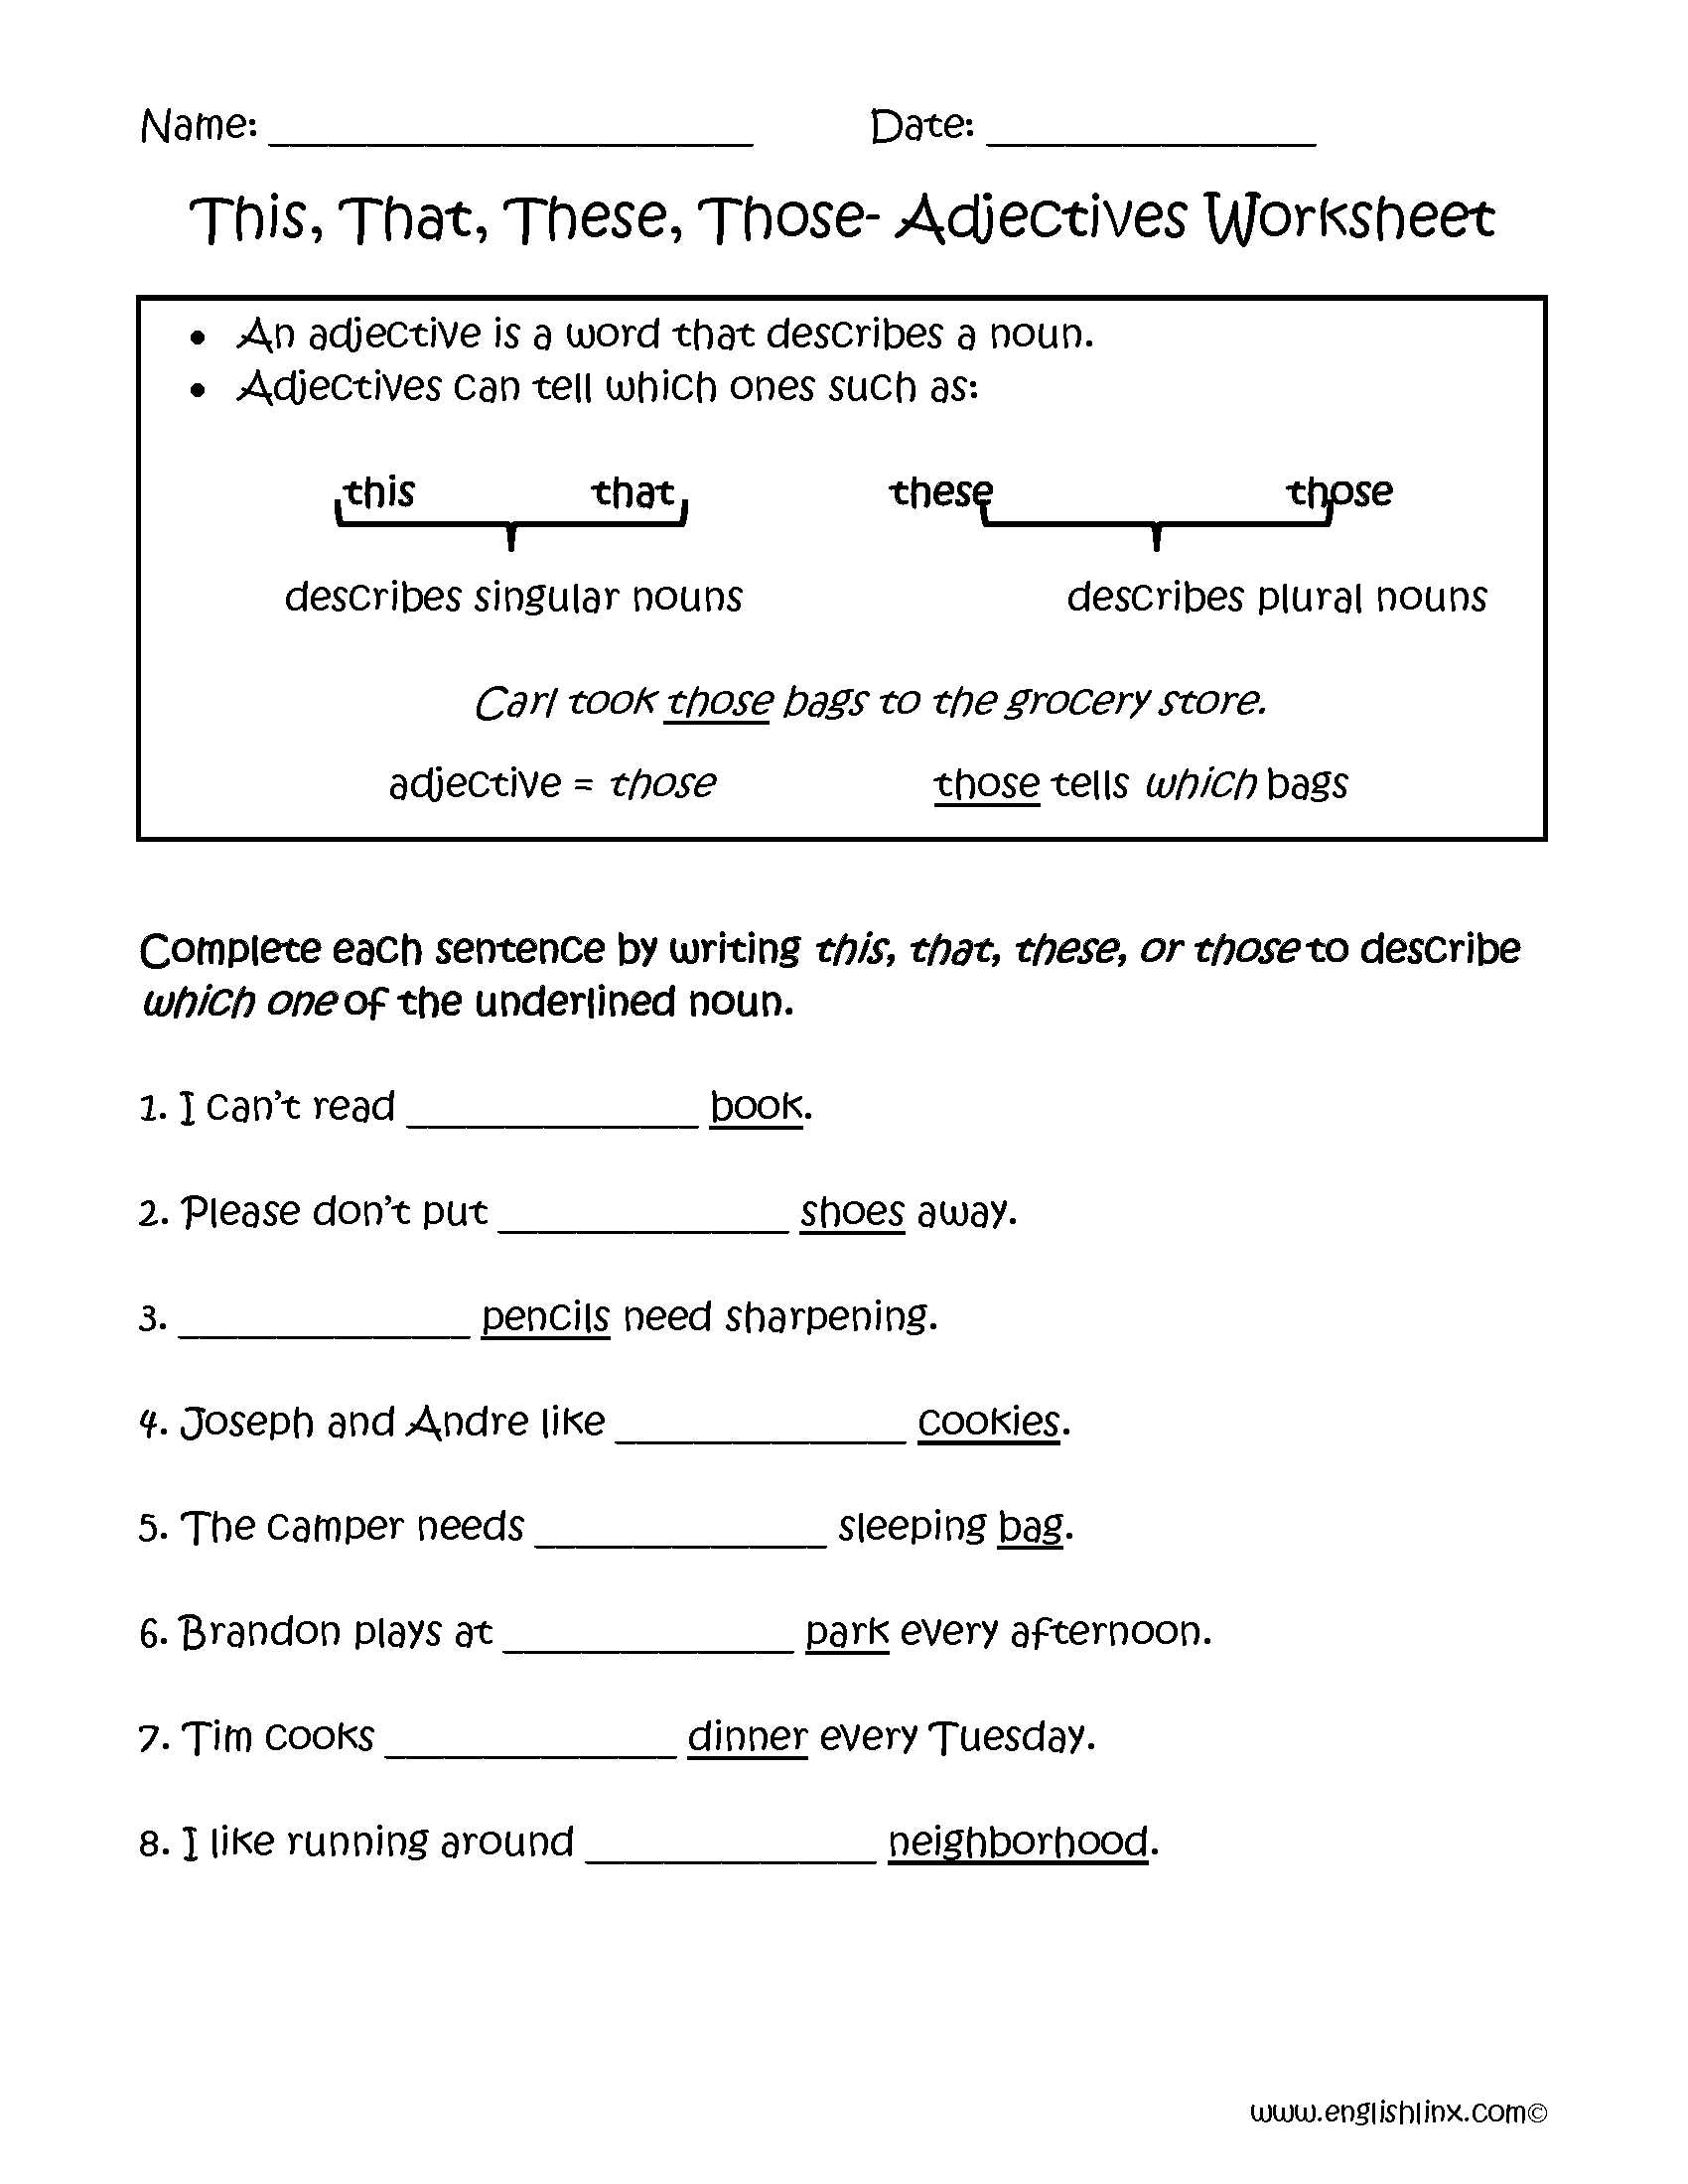 Identify Nouns and Adjectives Worksheets together with This that these Those Adjectives Worksheets